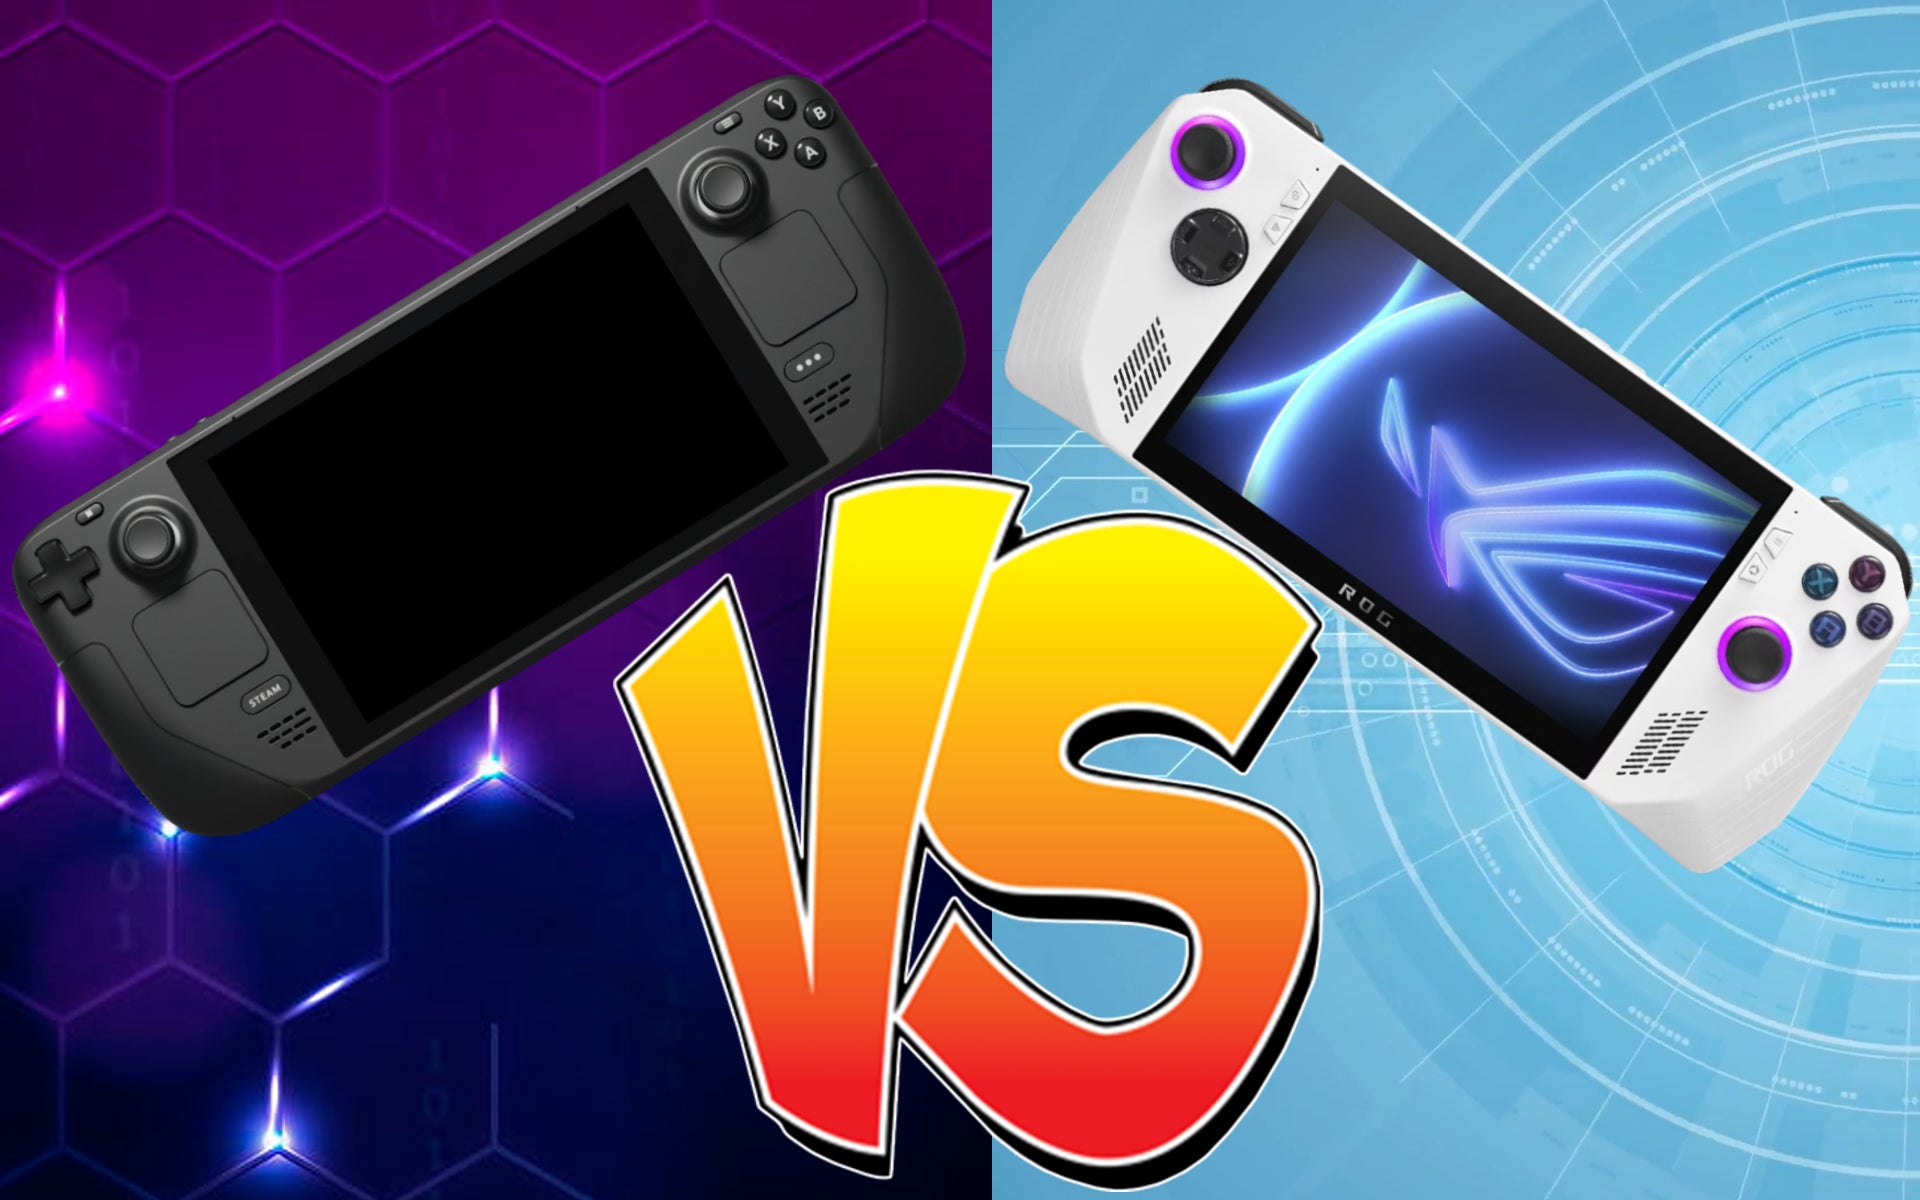 Asus ROG Ally vs Steam Deck: can powerful new tech deliver a game-changing  handheld?